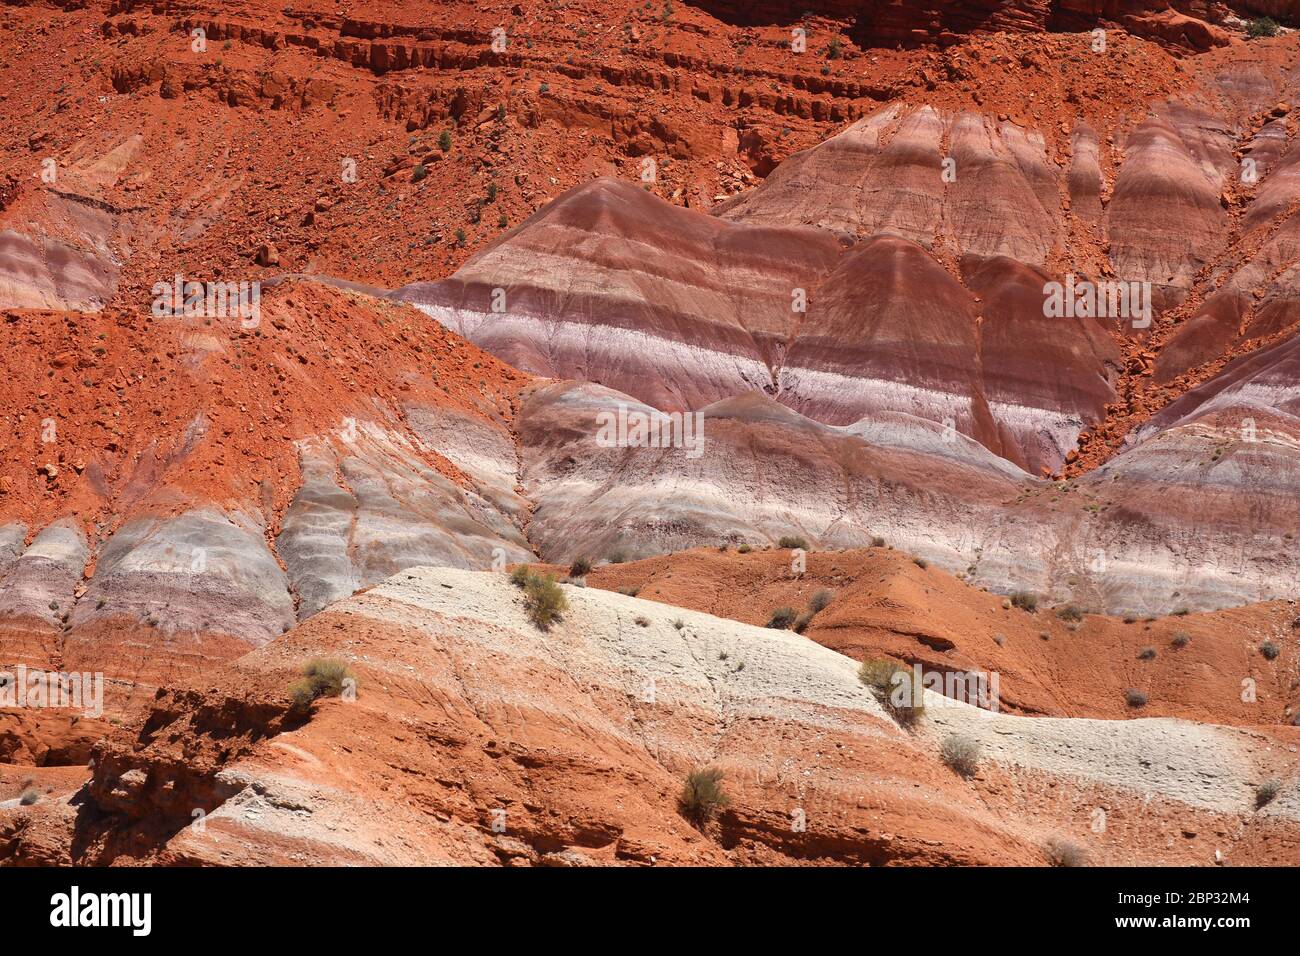 Colorful red colors of the badlands landscape at Paria River Canyon, Utah Stock Photo